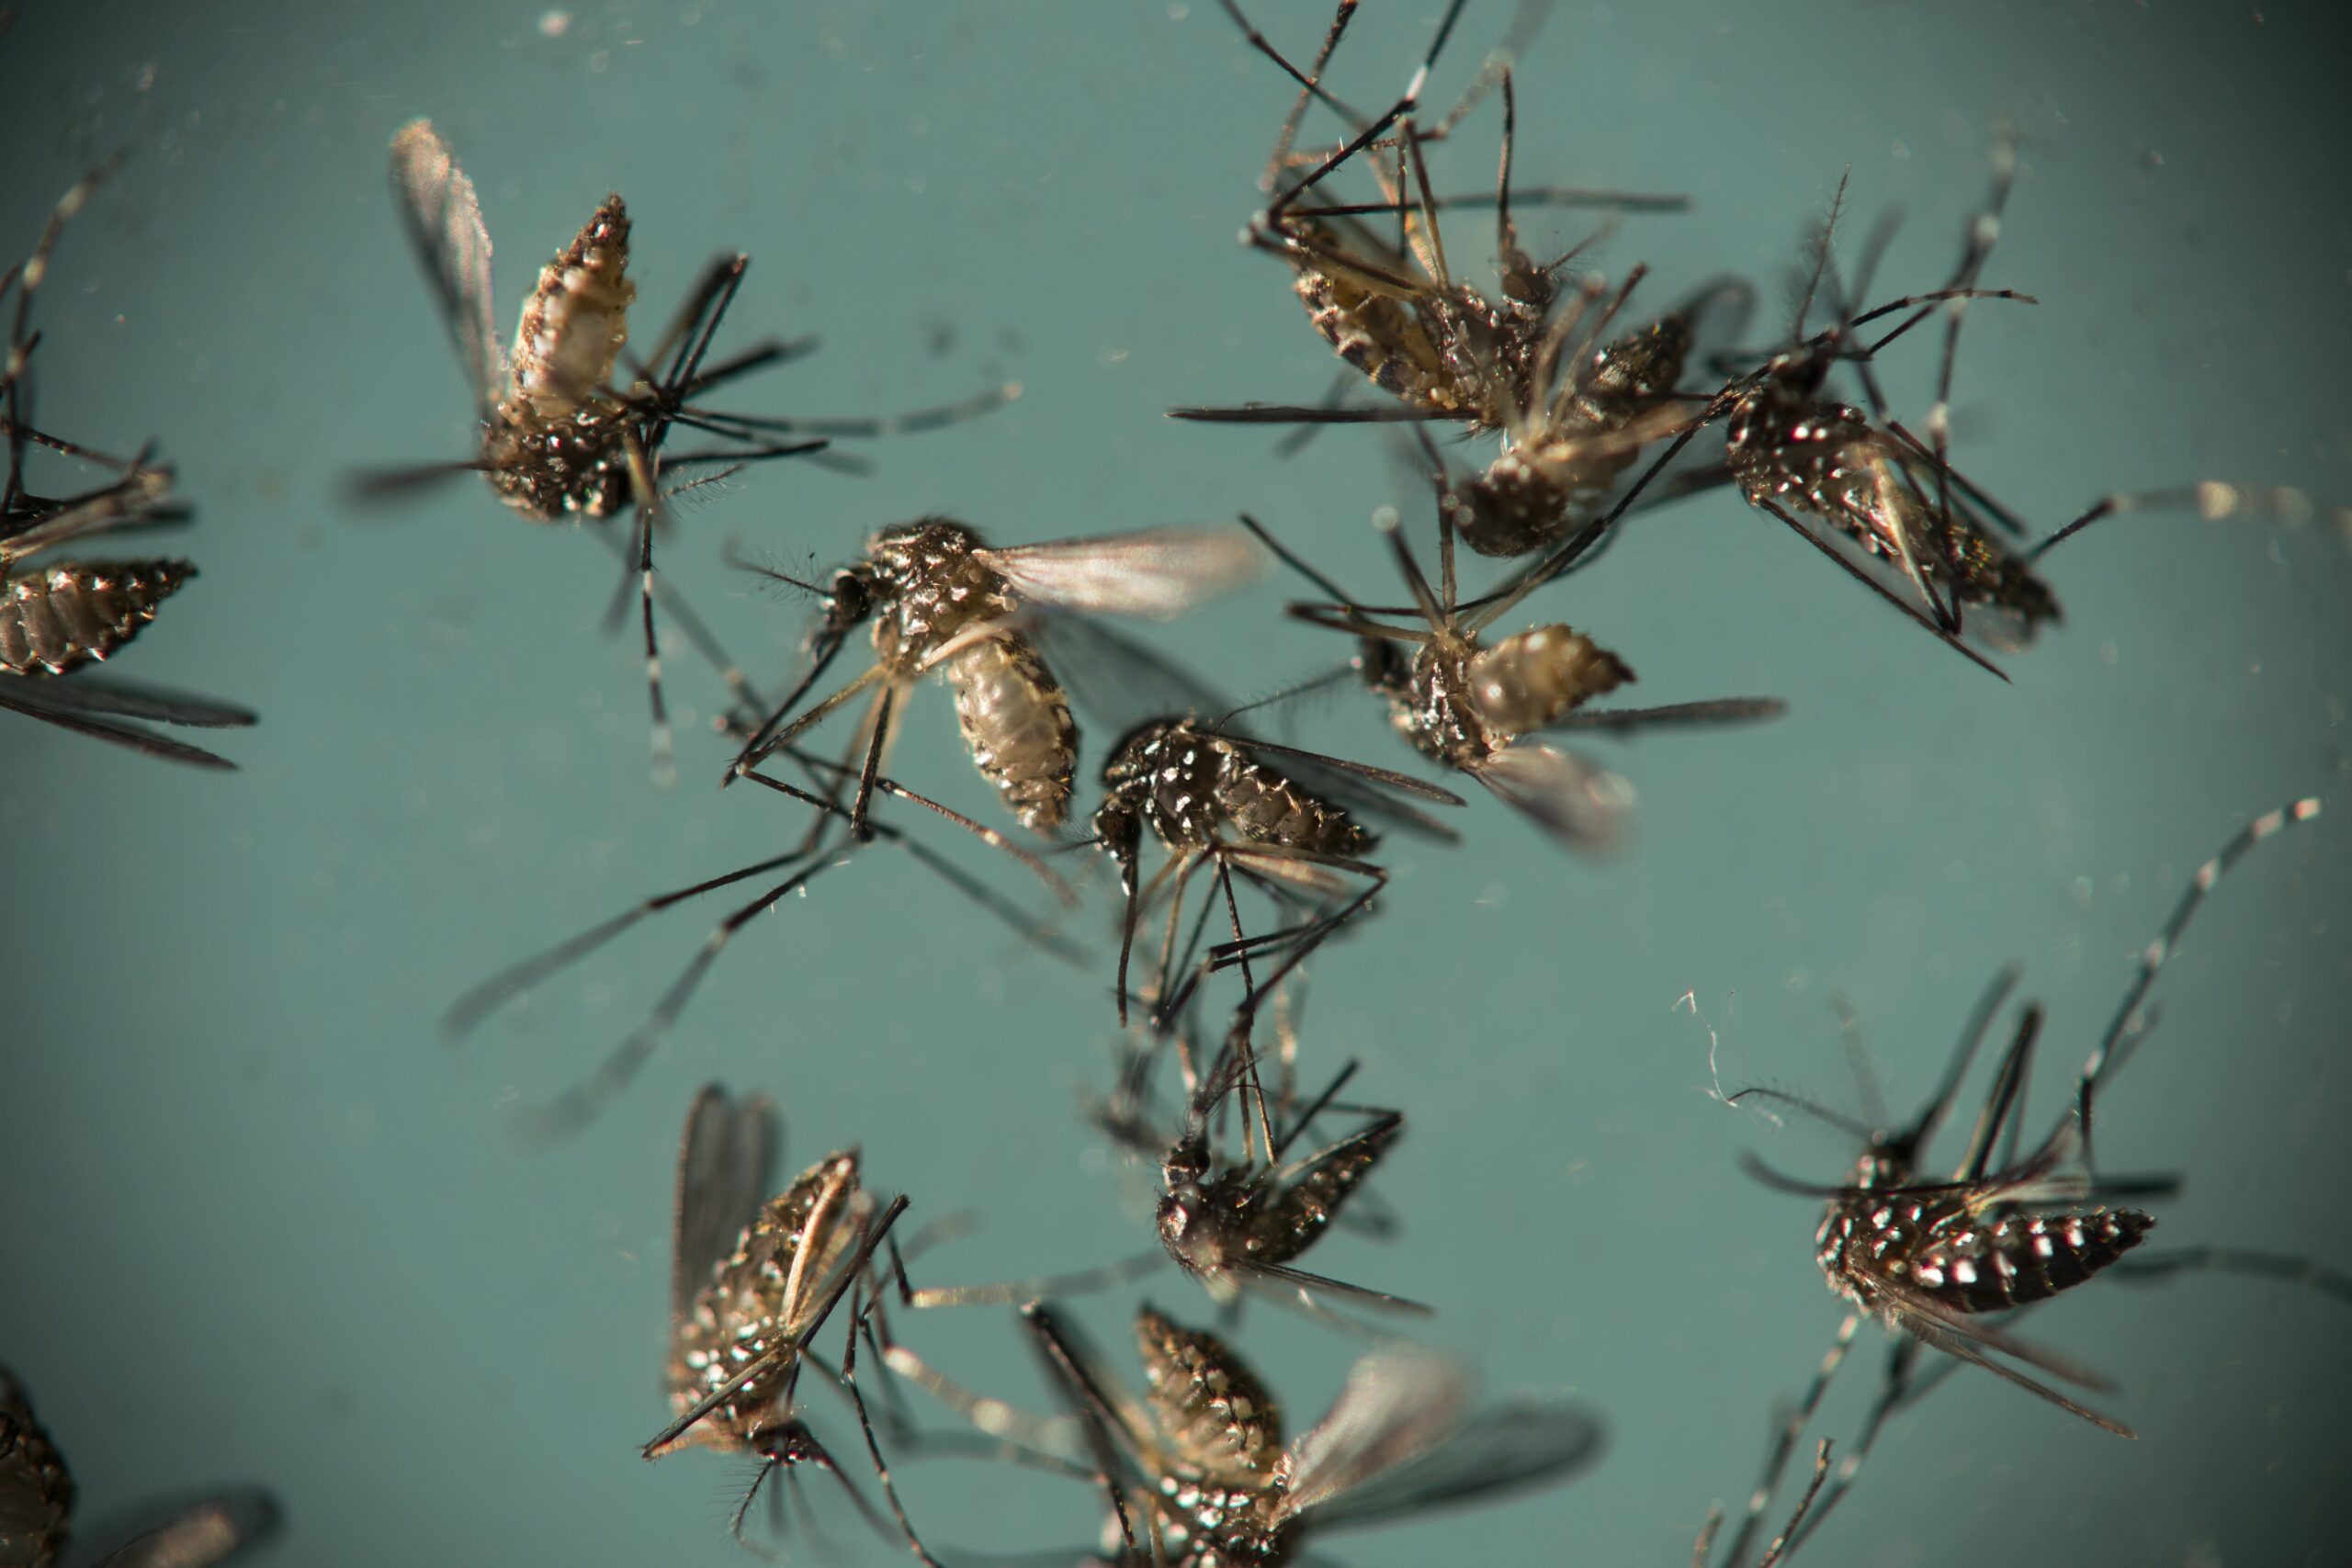 Aedes aegypti mosquitoes, responsible for transmitting Zika, sit in a petri dish